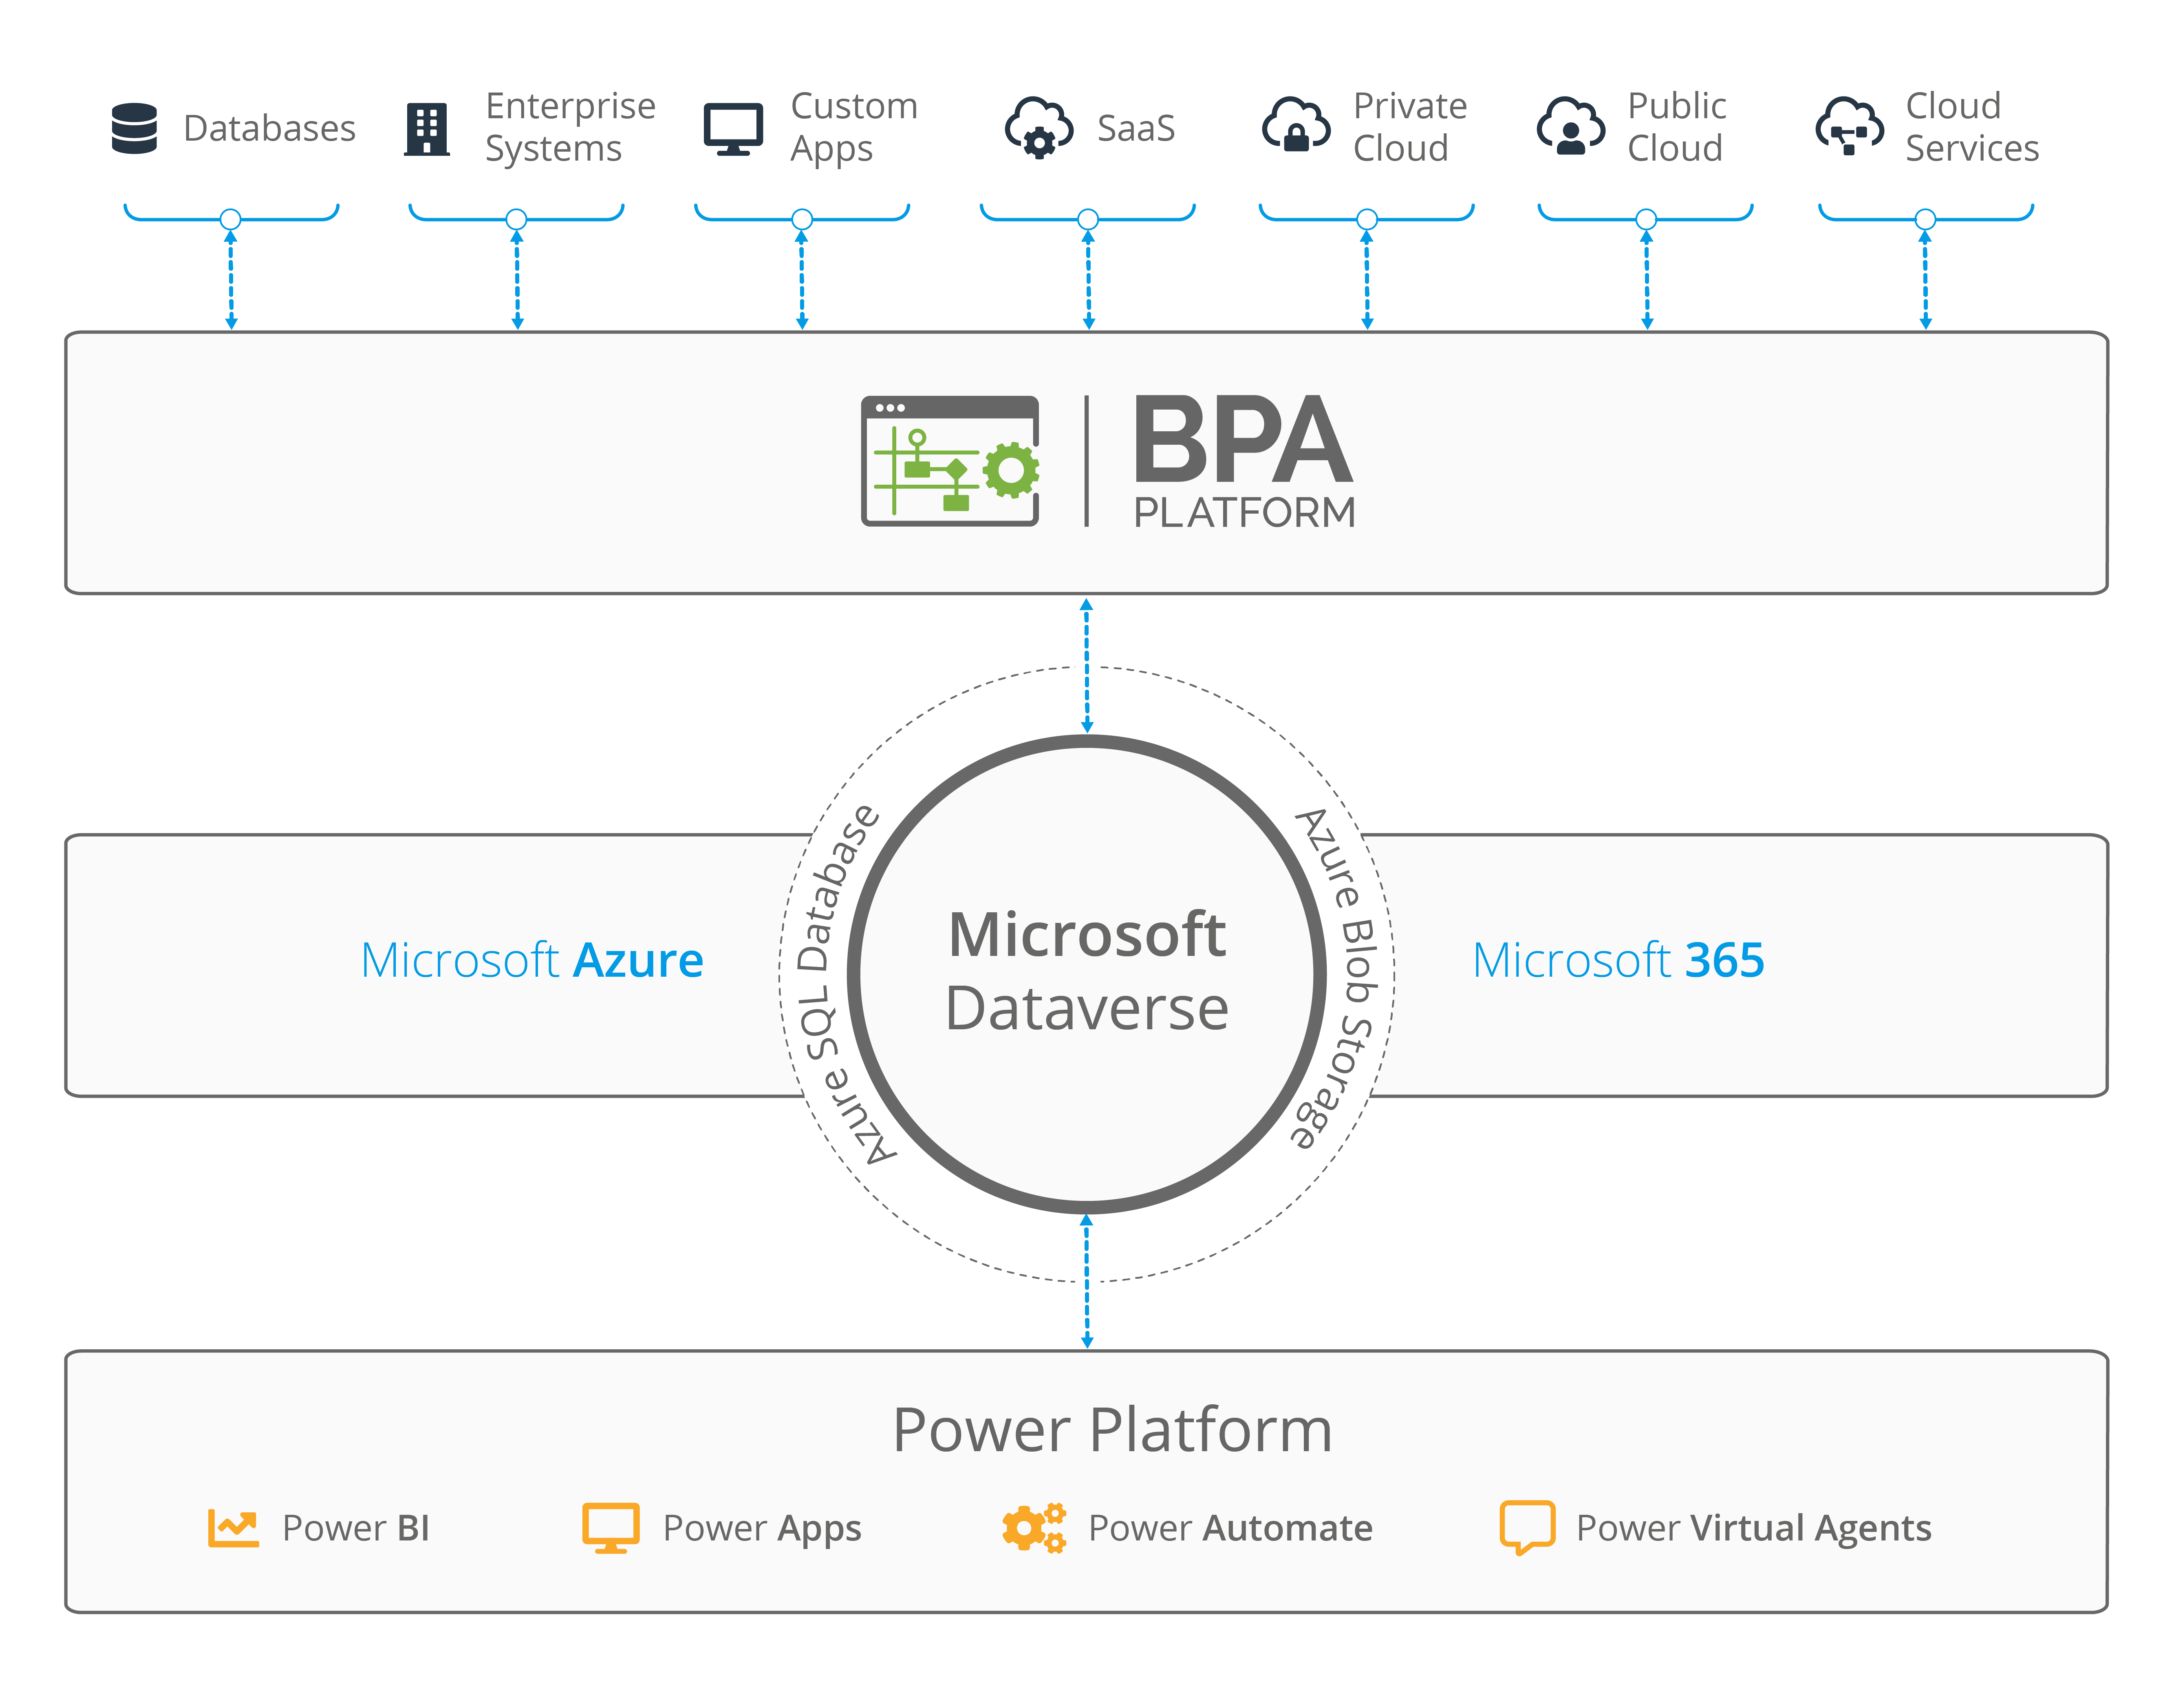 What is Microsoft Dataverse